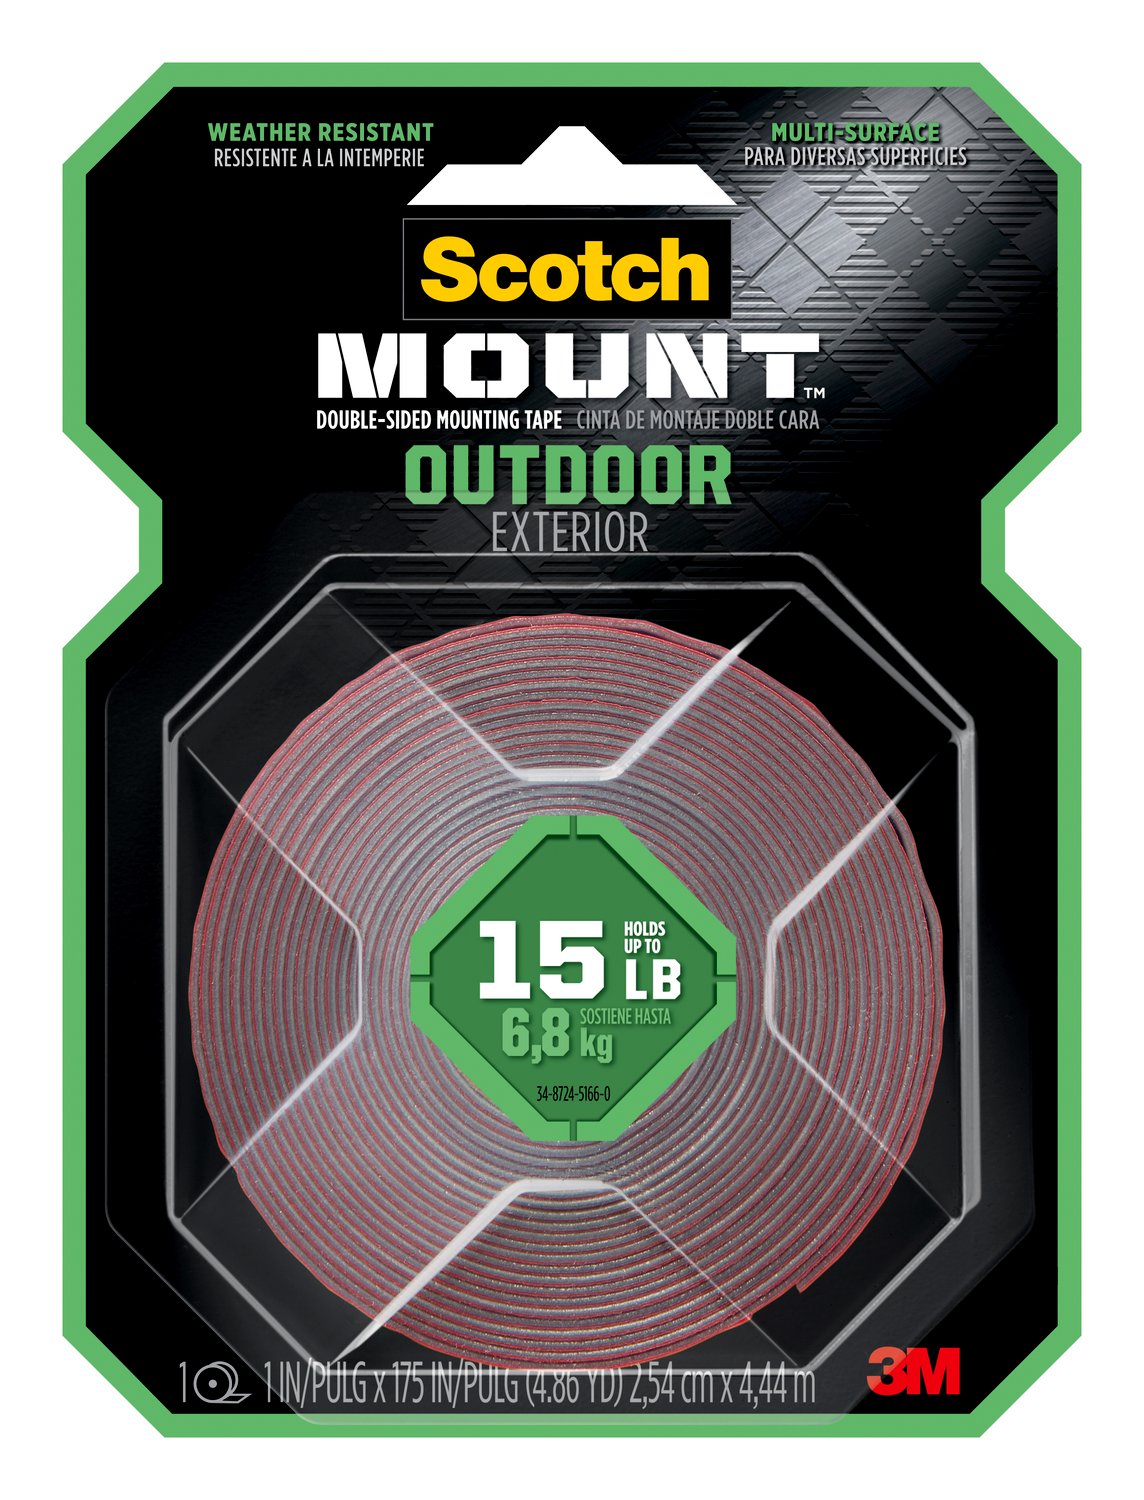 7100220256 - Scotch-Mount Outdoor Double-Sided Mounting Tape 411H-MED, 1 in x 175 in (2.54 cm x 4.44 m)